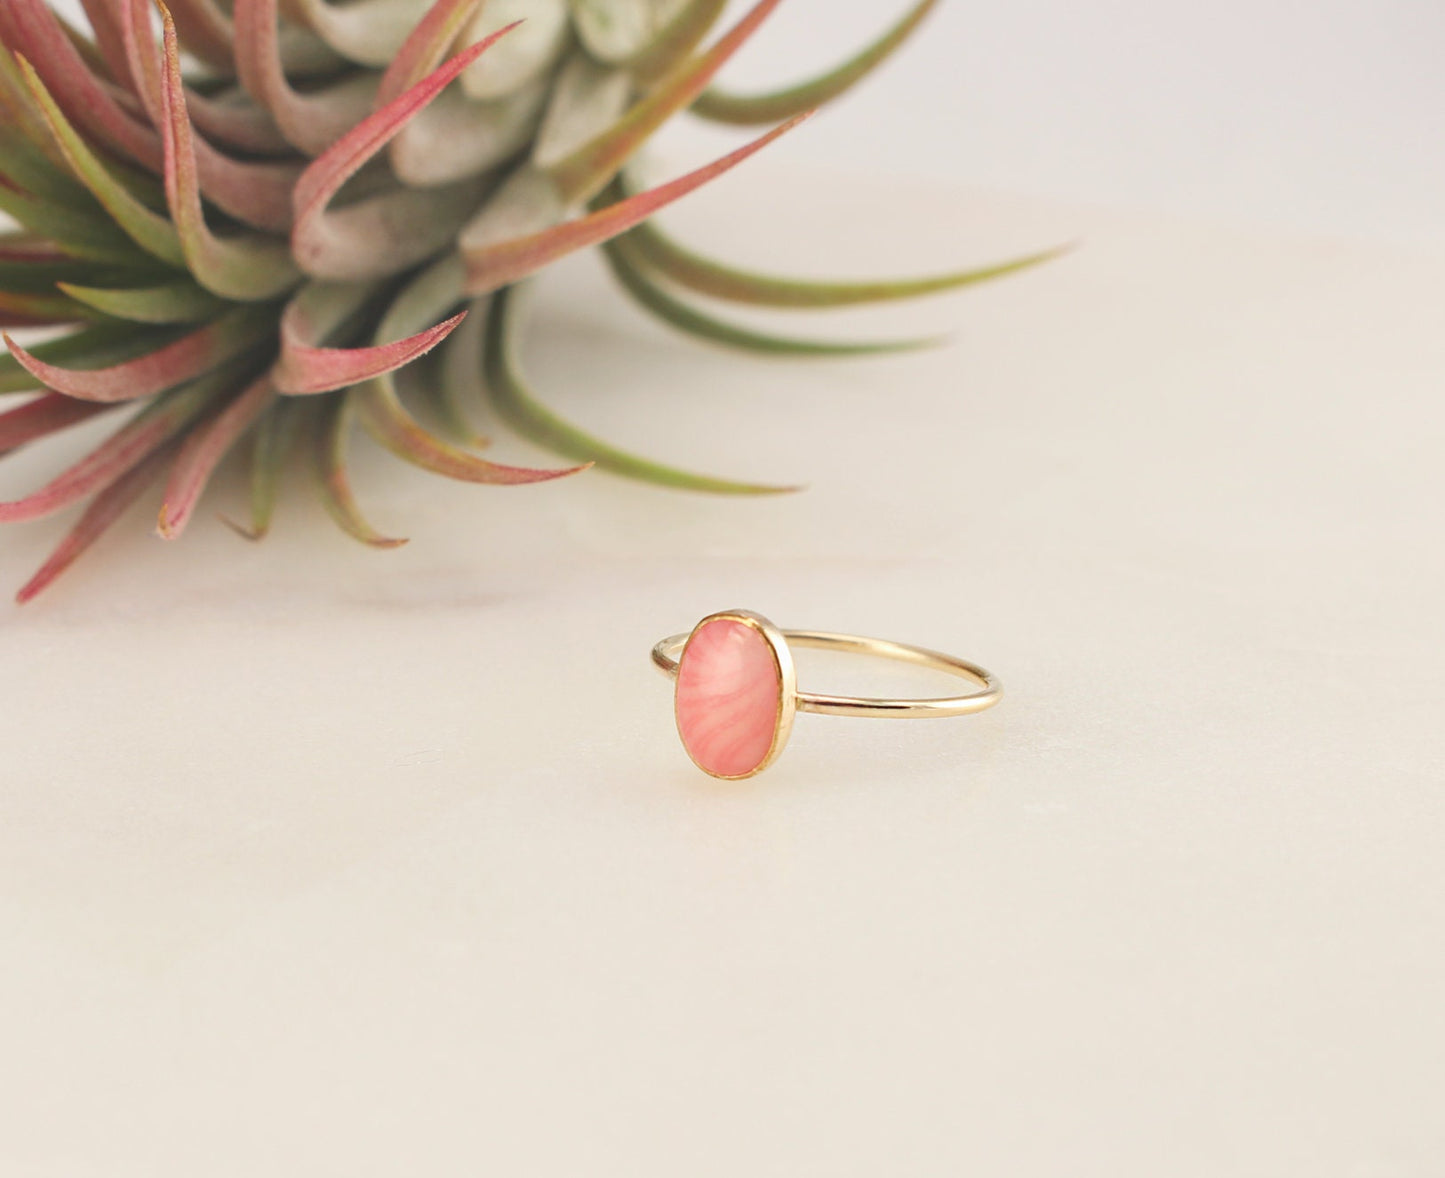 NEW Oval Pink Coral  Ring - 14K Gold Filled, 6x8mm Natural Coral, 1mm Gold Filled Ring